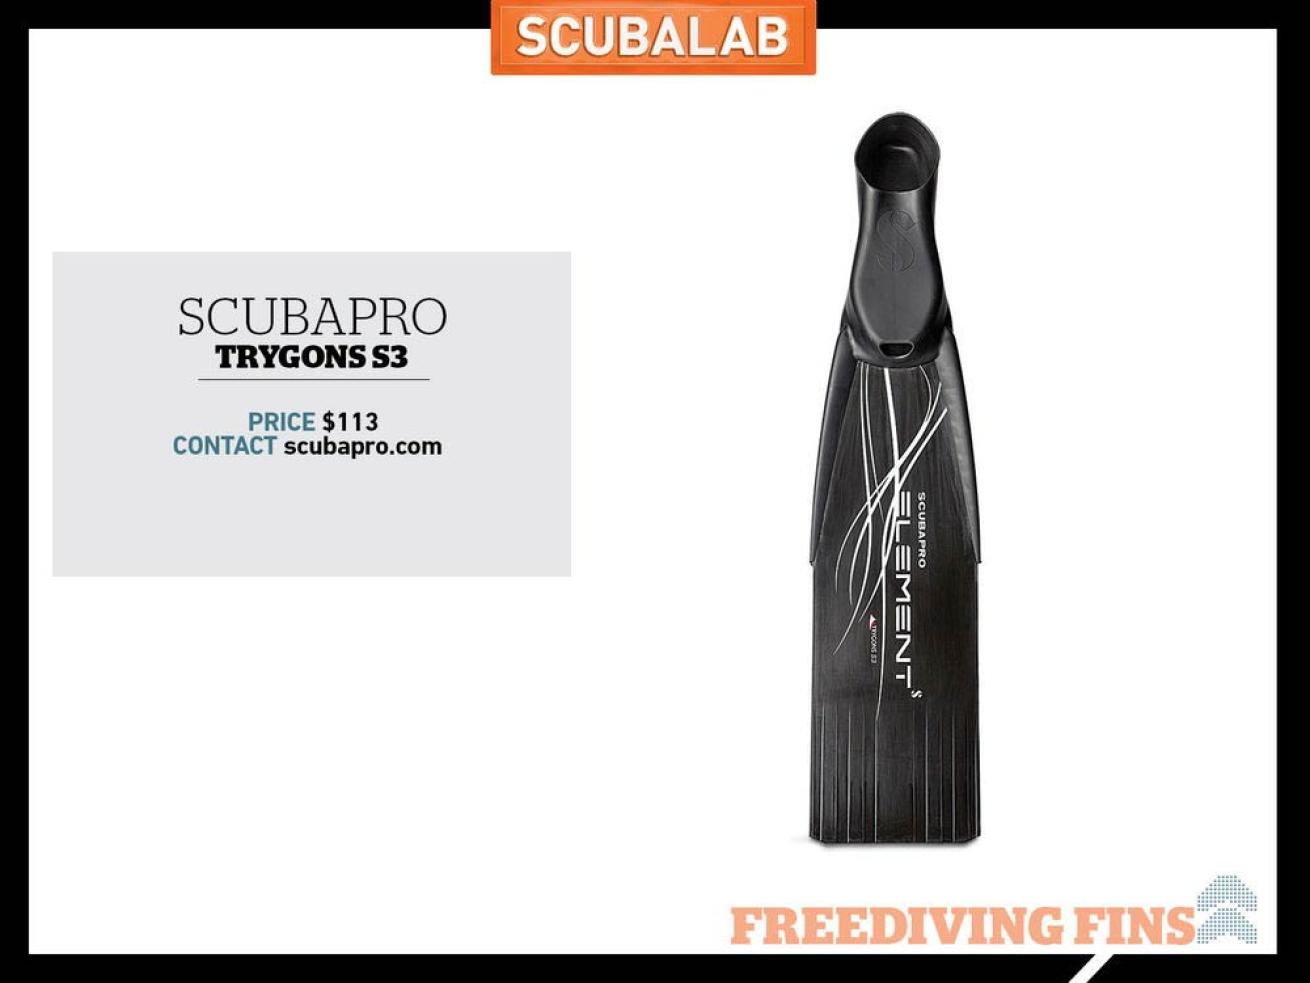 Scubapro Freediving Fin Trygons S3